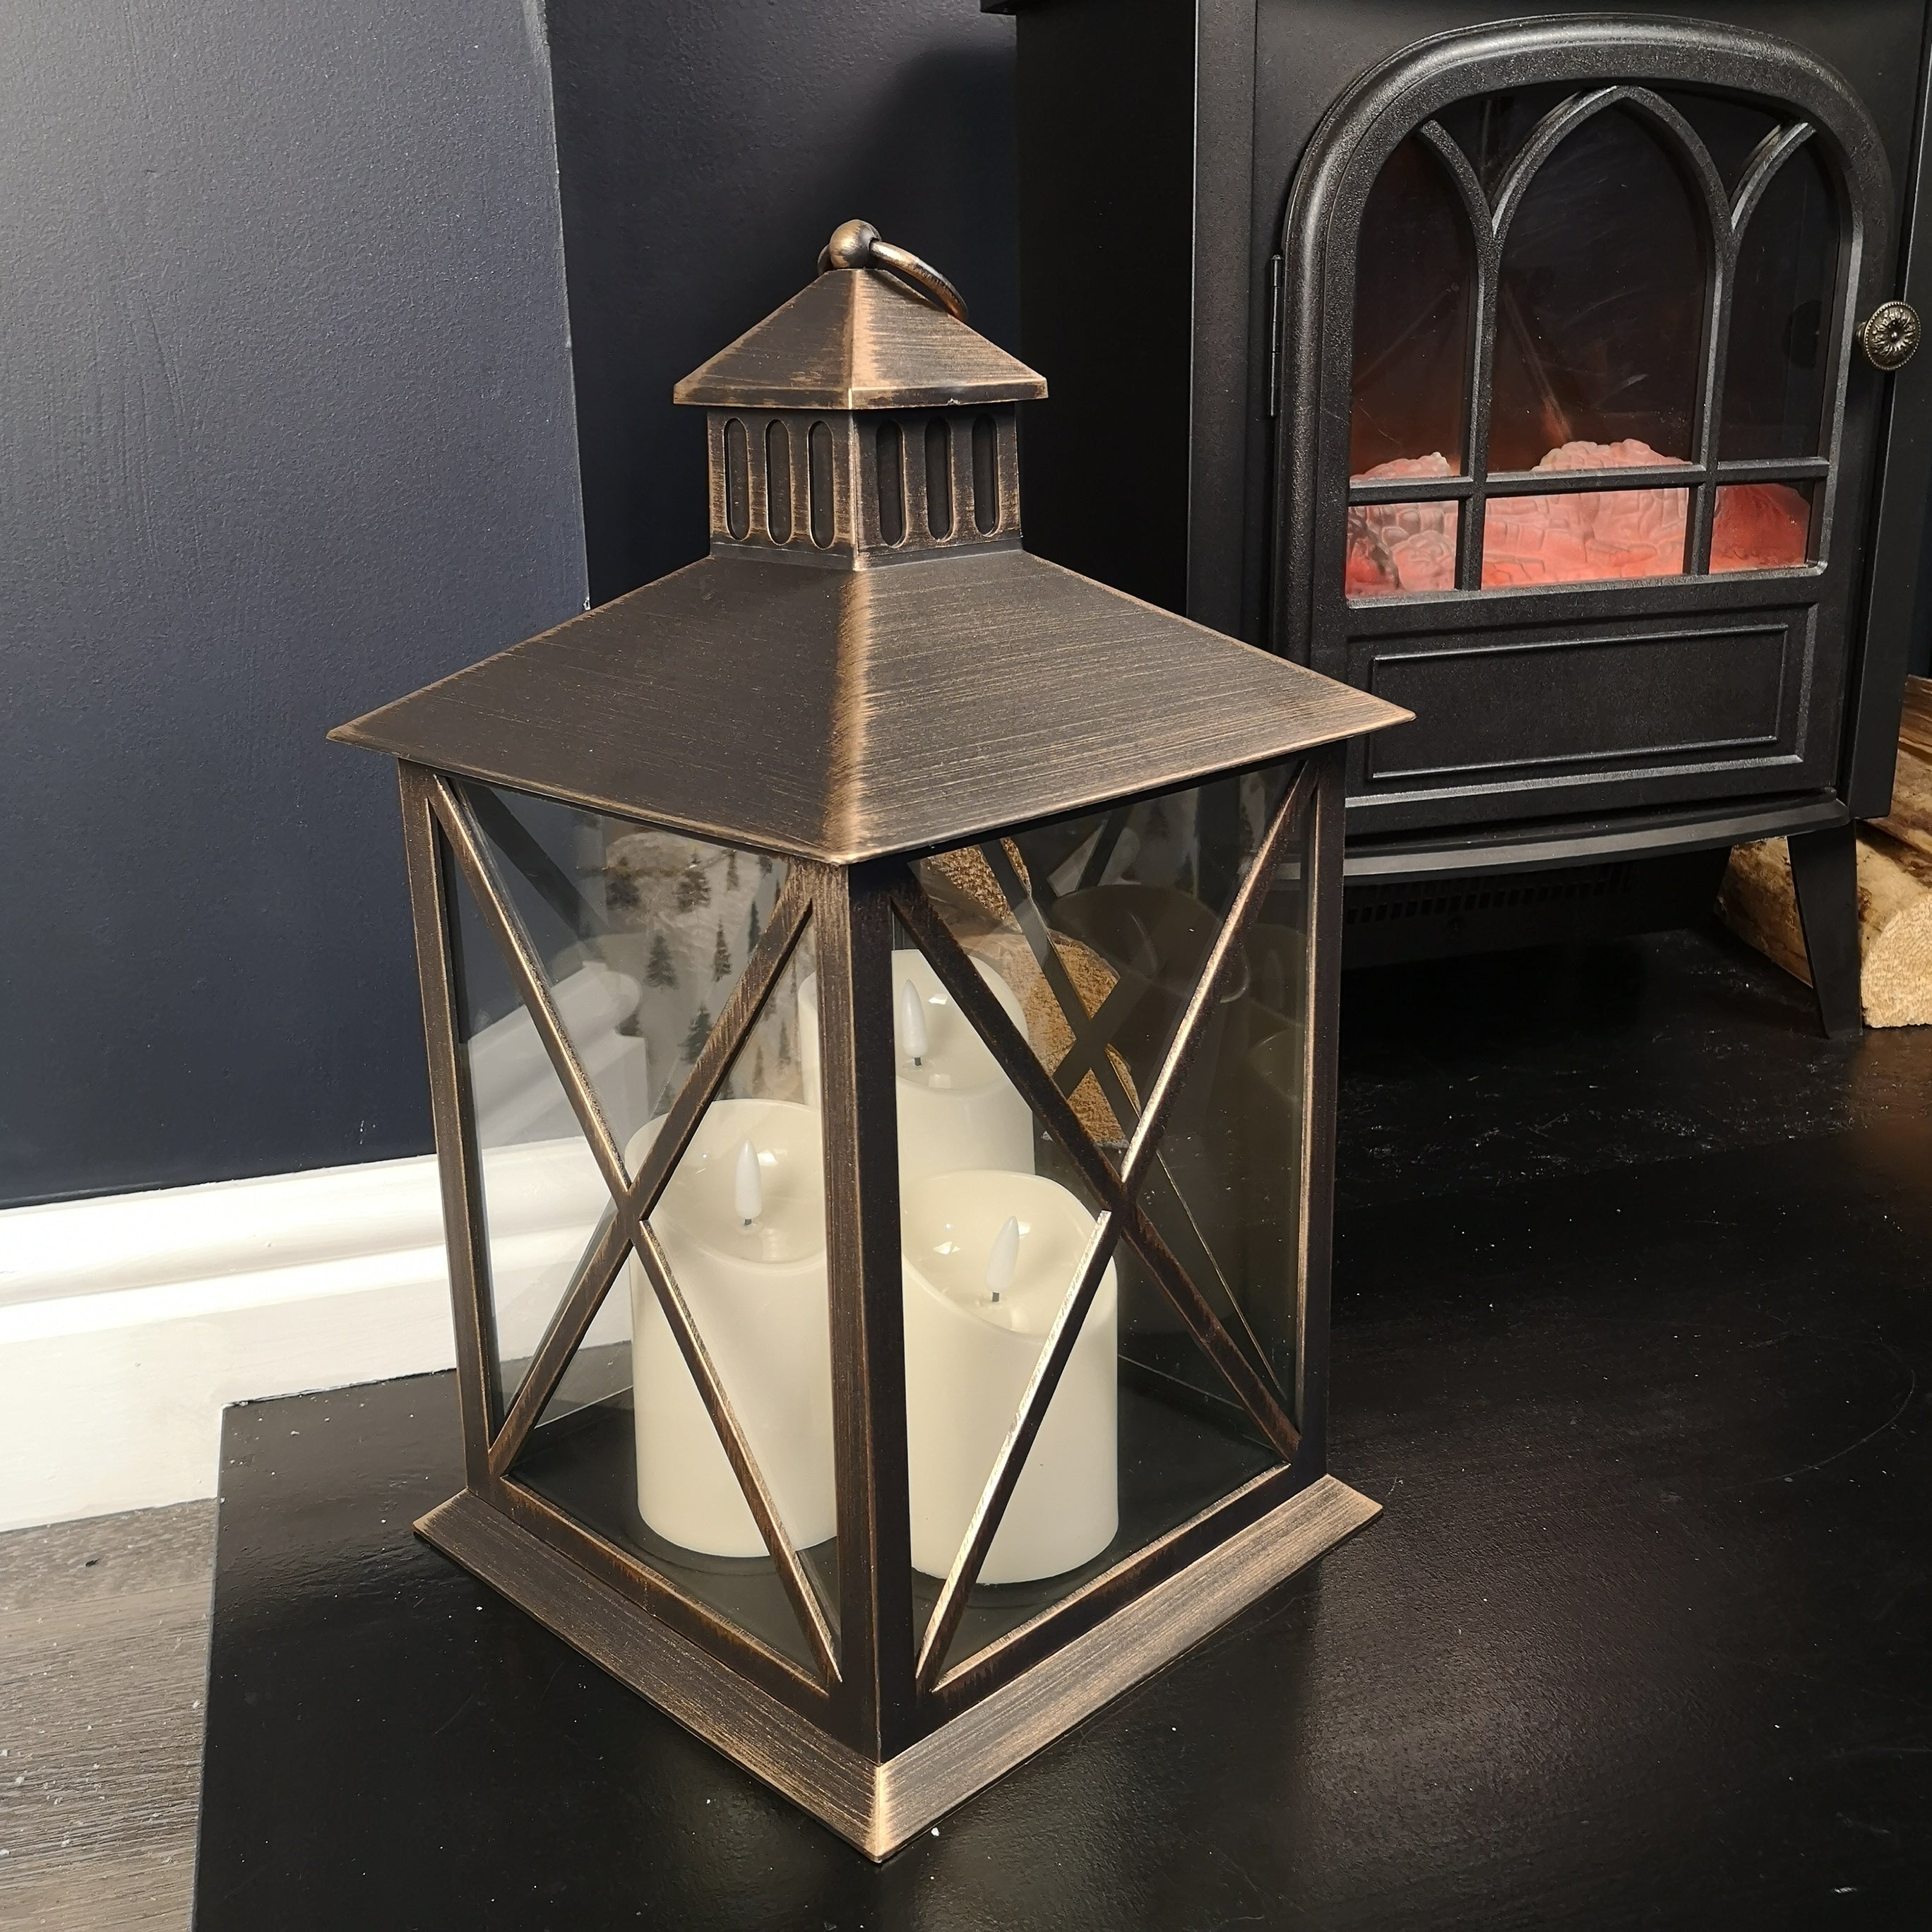 40cm Battery Operated Triple Lantern with Timer in Bronze